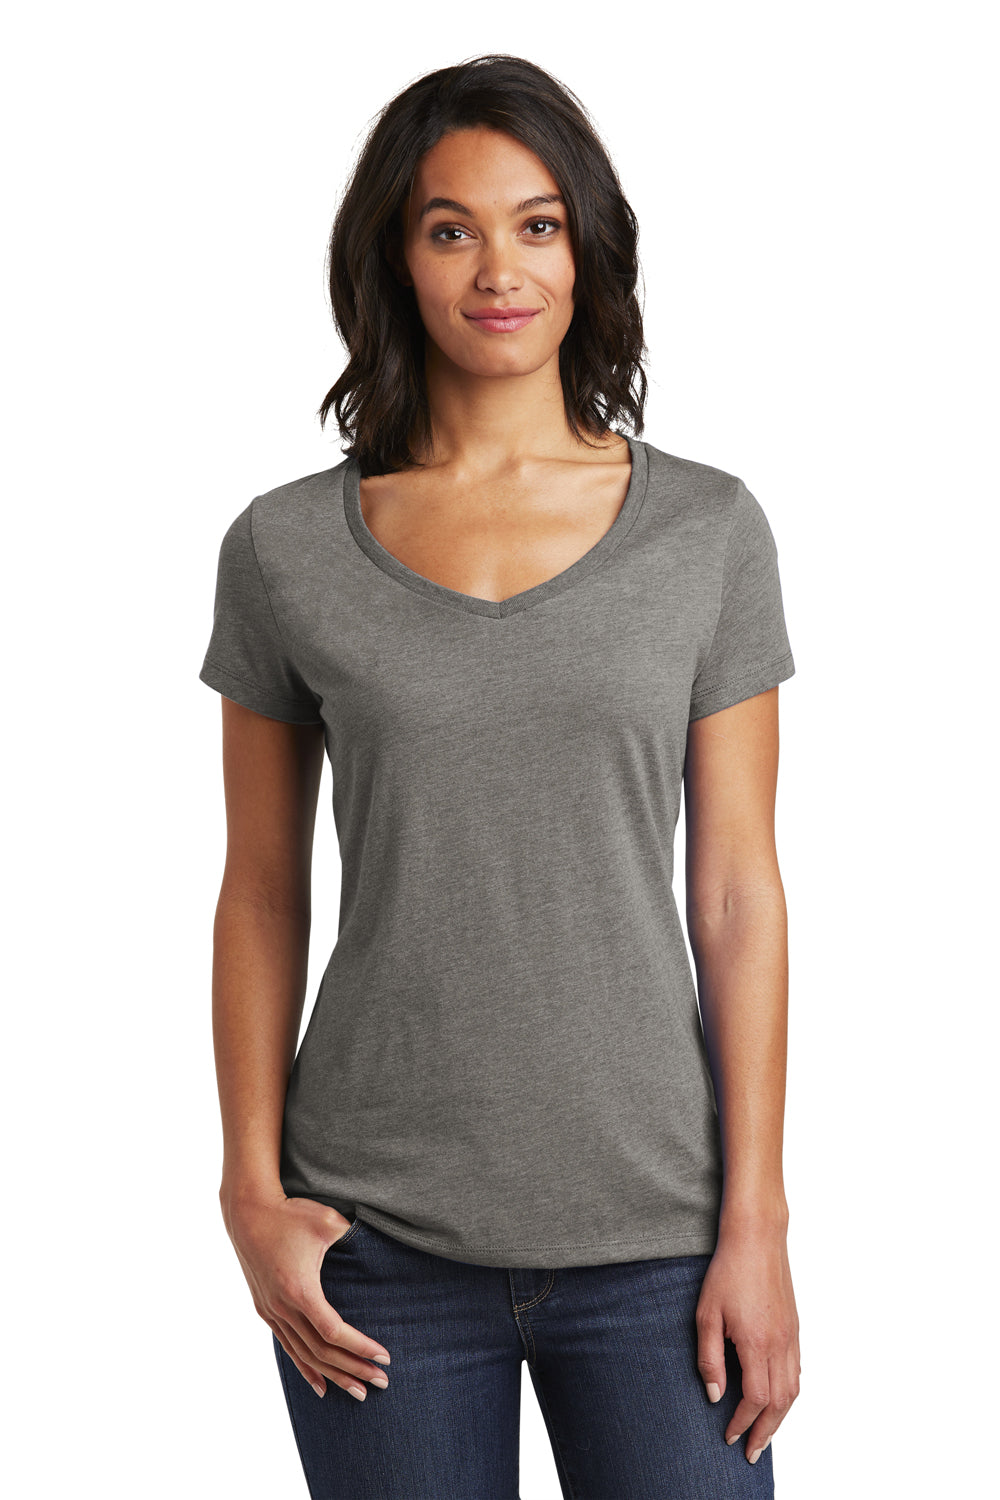 District DT6503 Womens Very Important Short Sleeve V-Neck T-Shirt Heather Grey Front